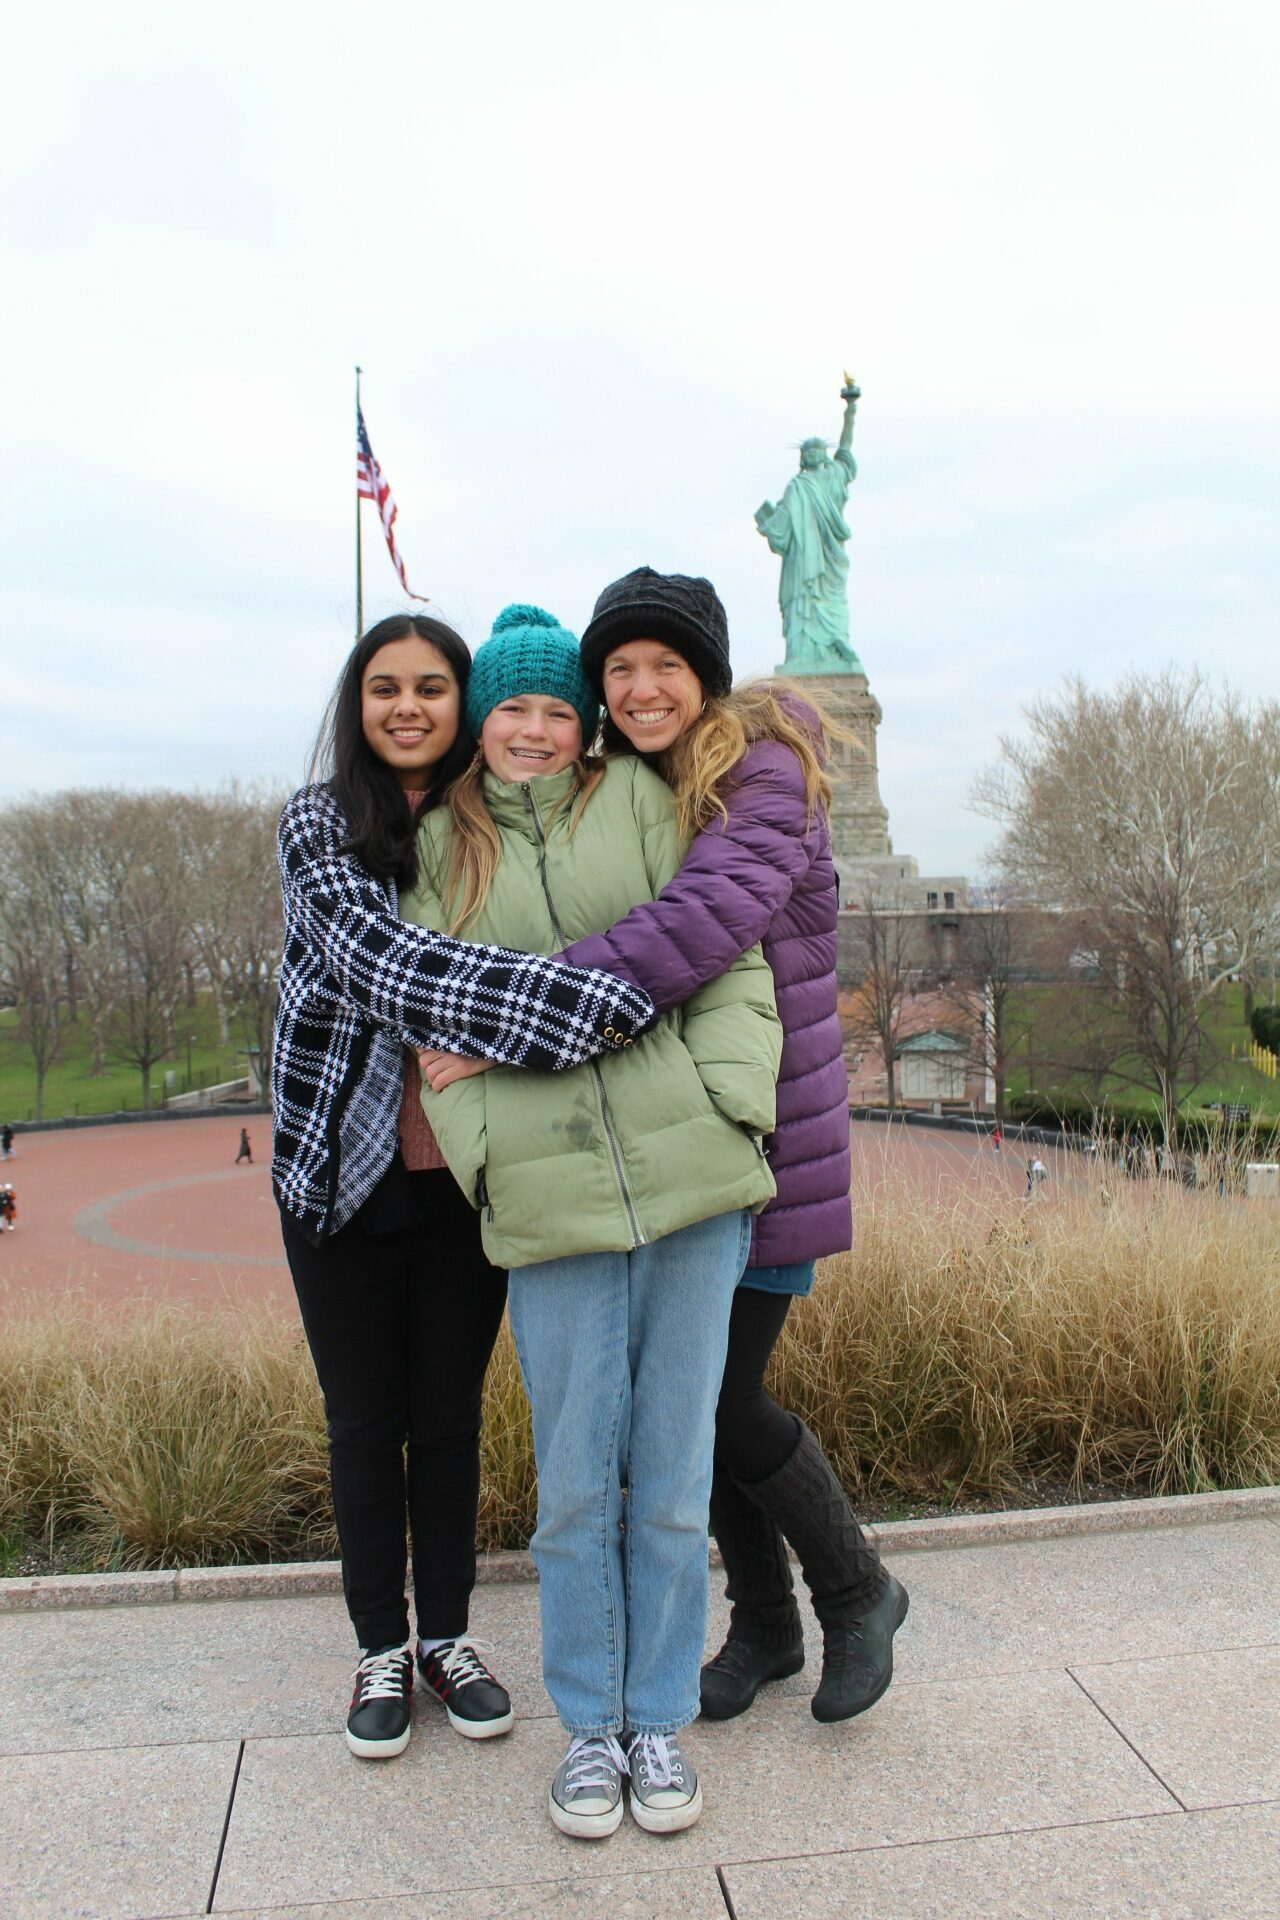 Aleeza at the Statue of Liberty with her host family.